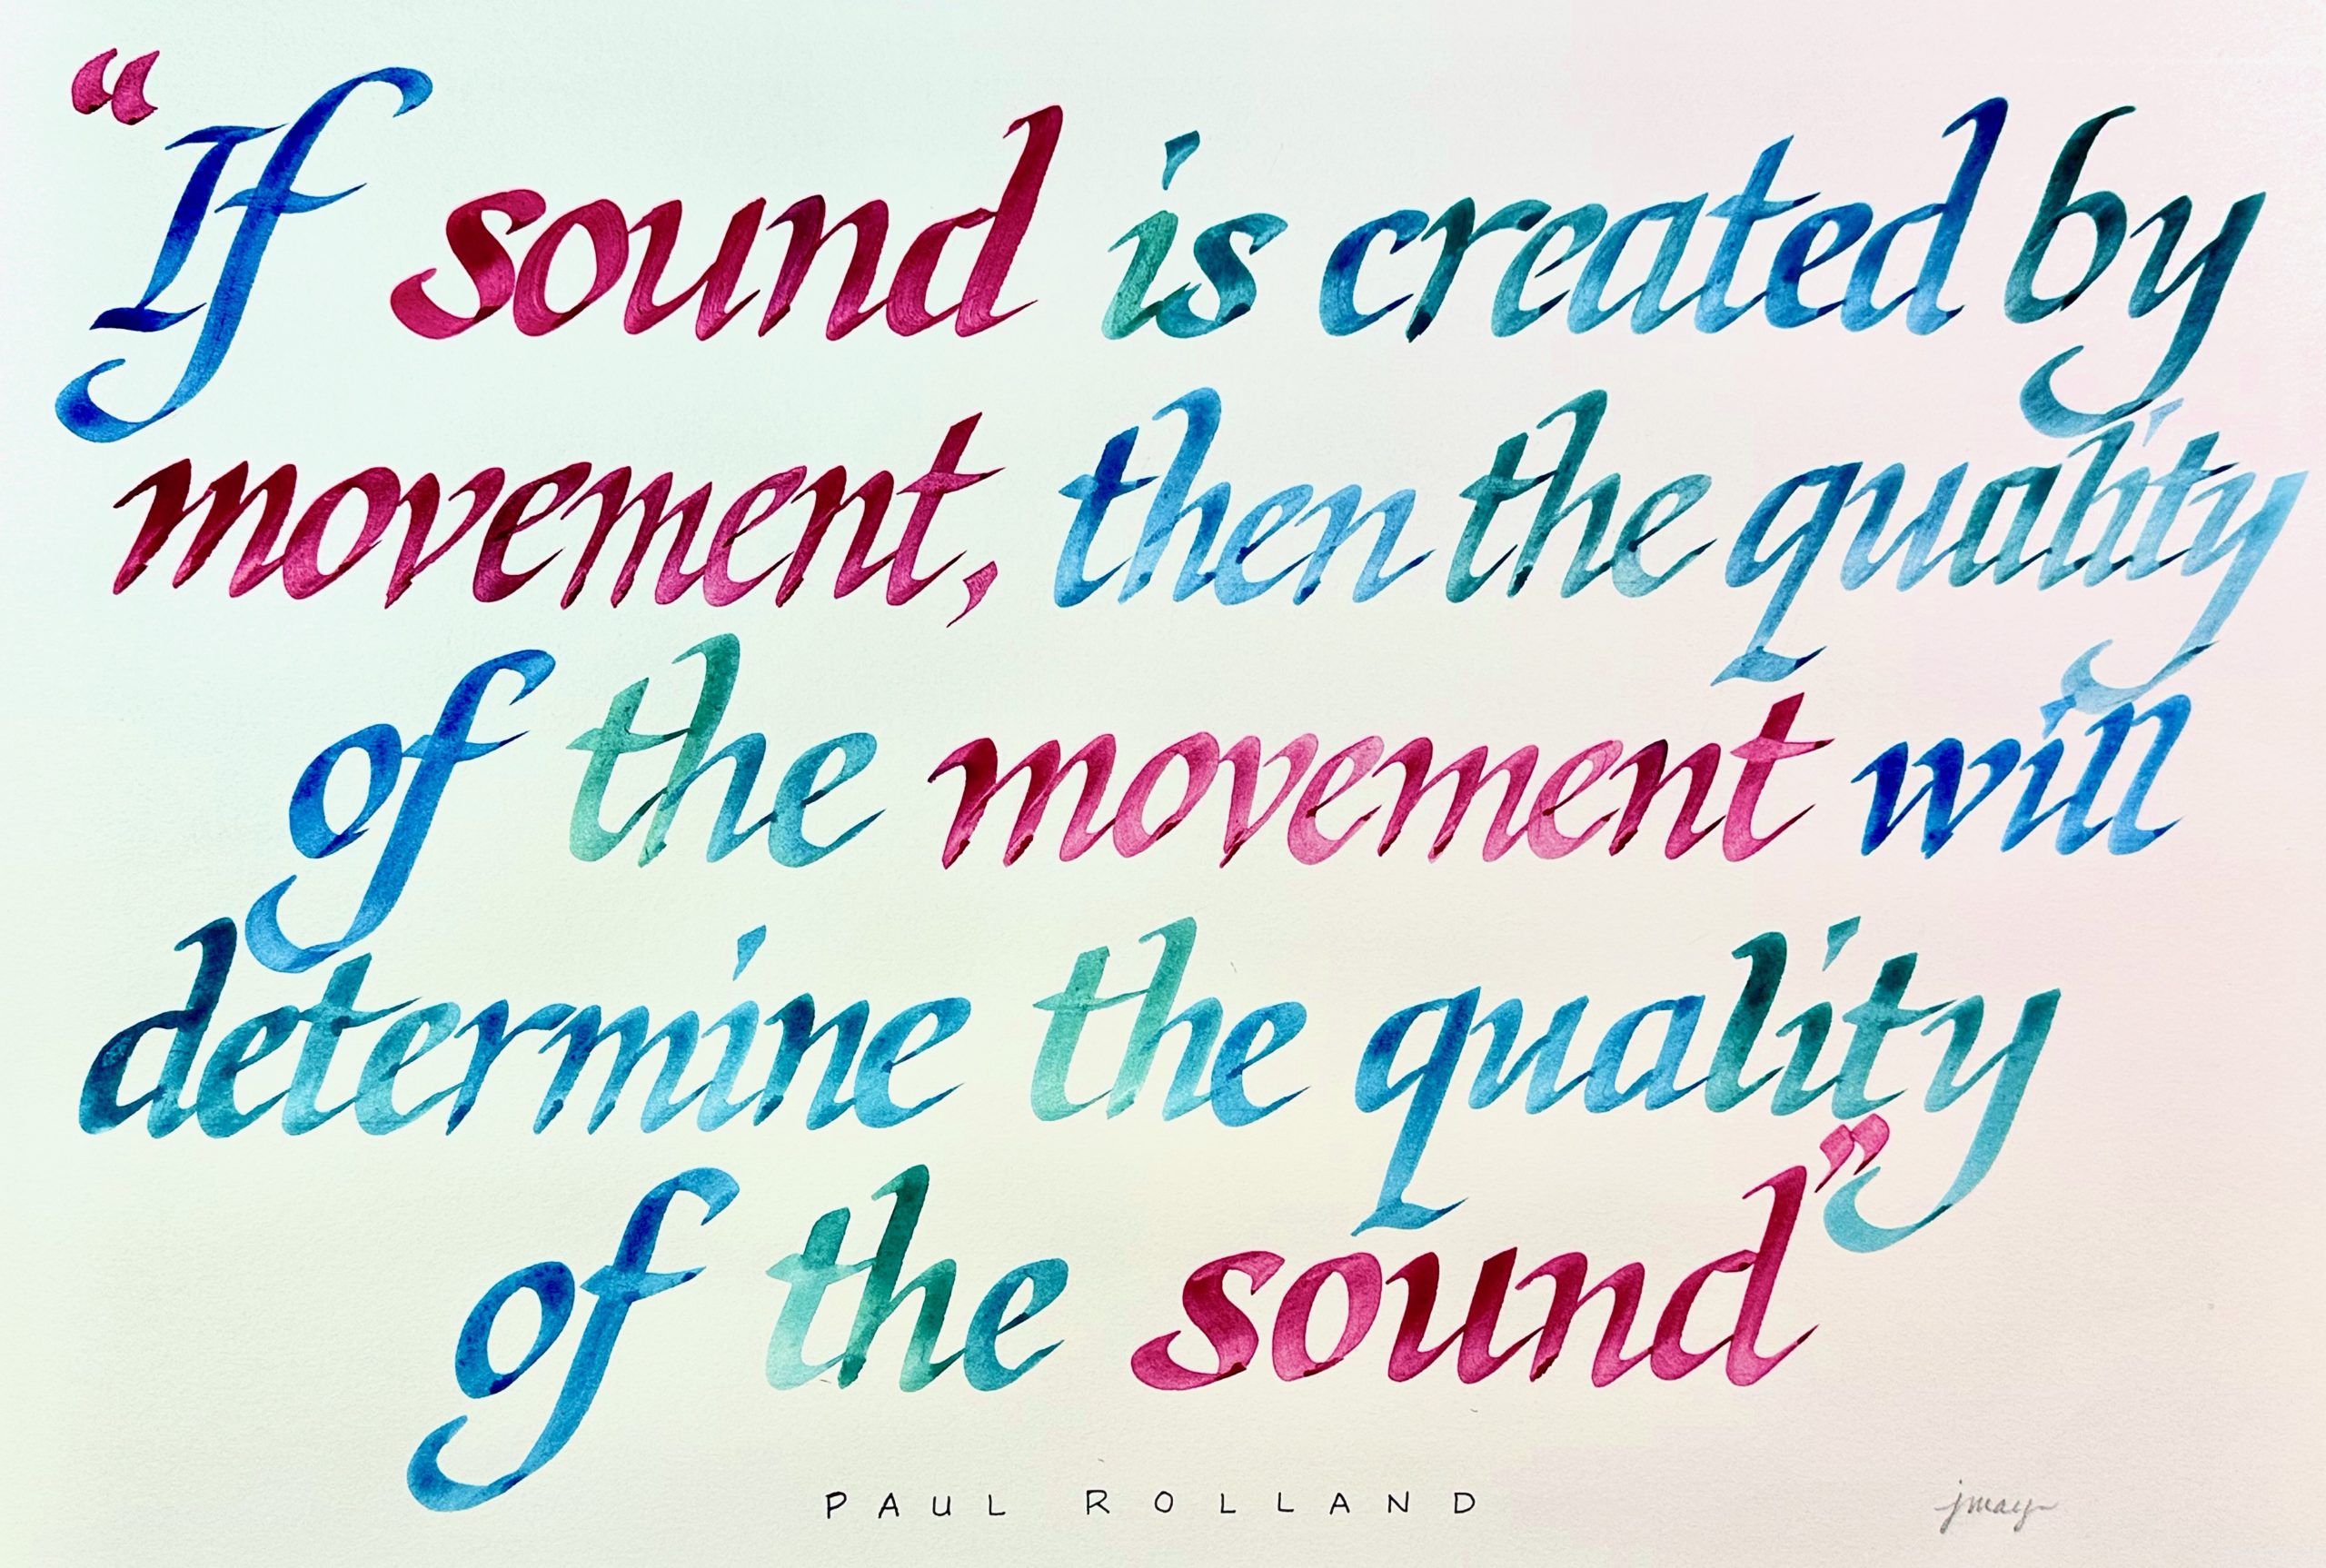 If sound is created by movement, then the quality of the movement will determine the quality of the sound.